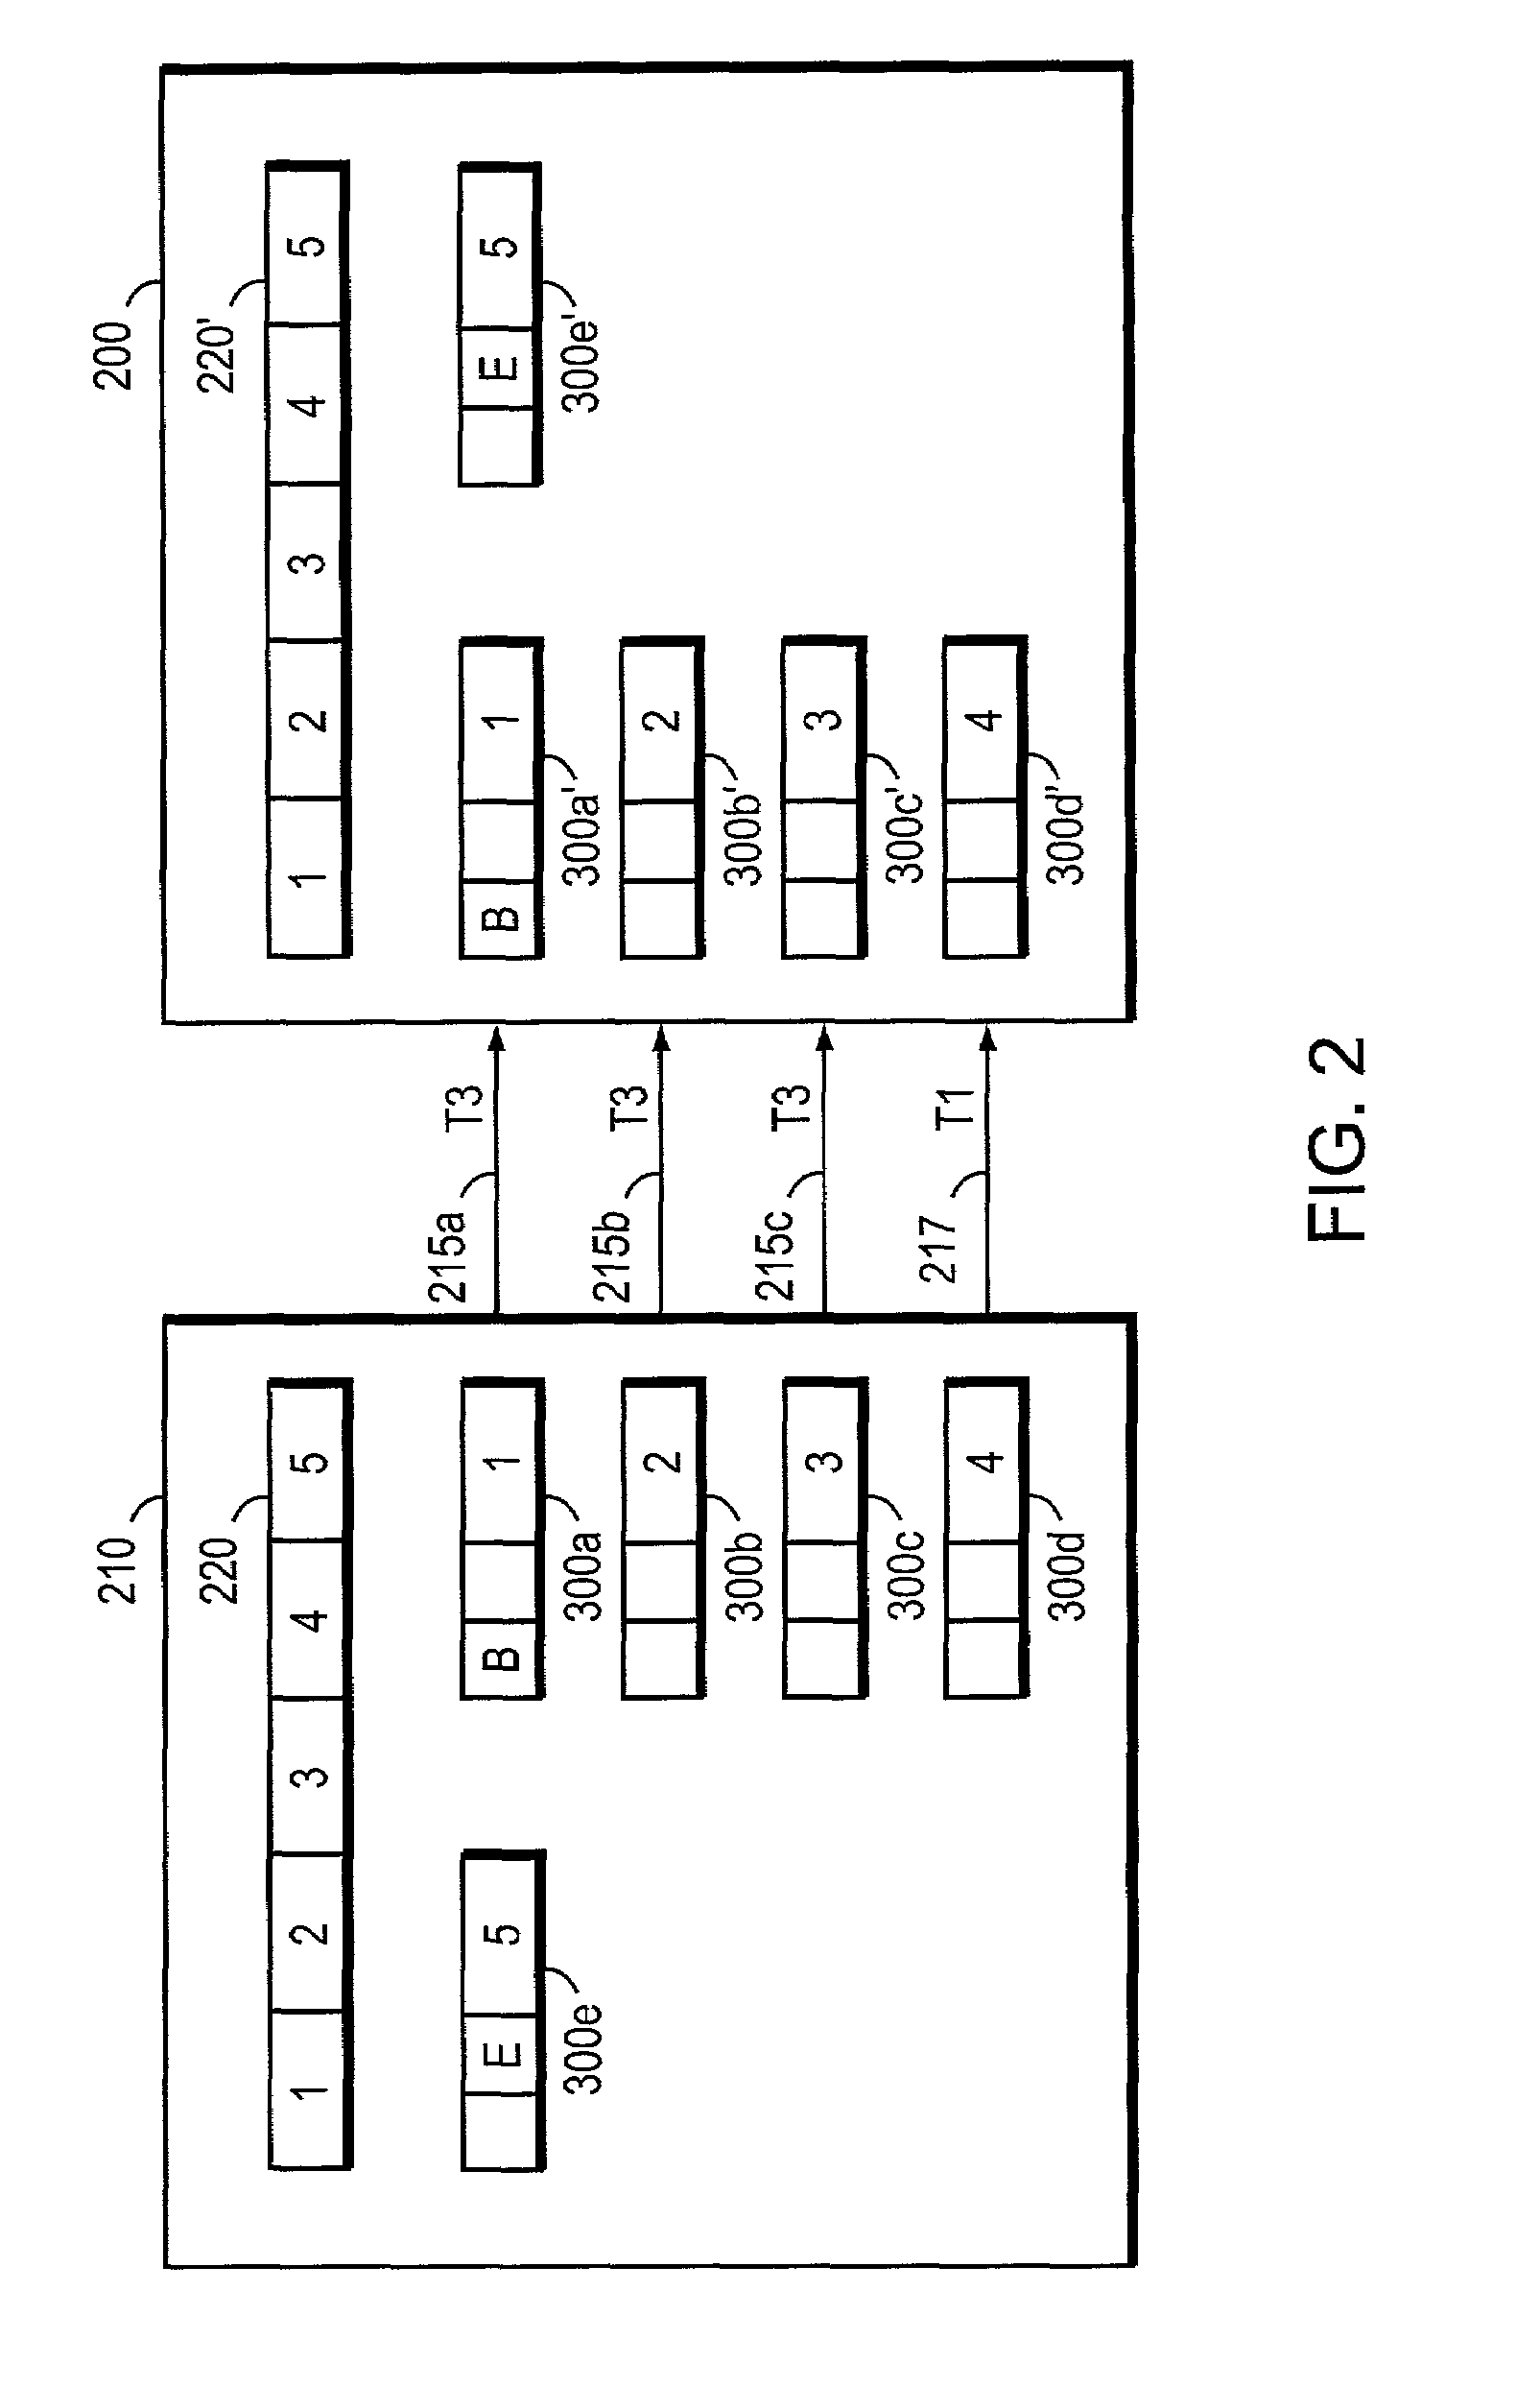 Multi-link protocol reassembly assist in a parallel 1-D systolic array system